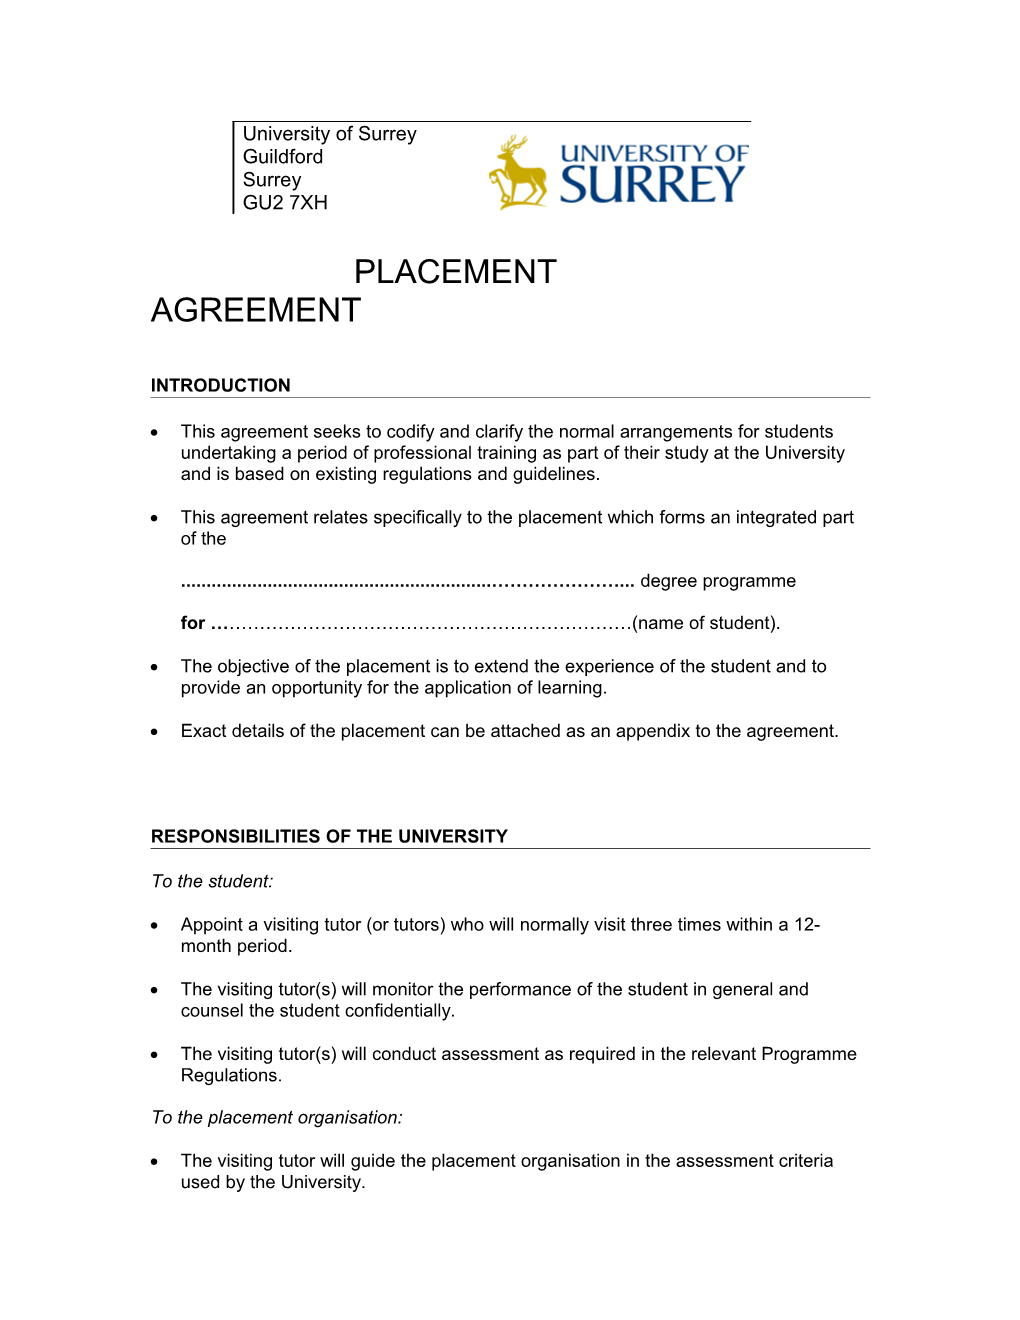 This Agreement Relates Specifically to the Placement Which Forms an Integrated Part of The